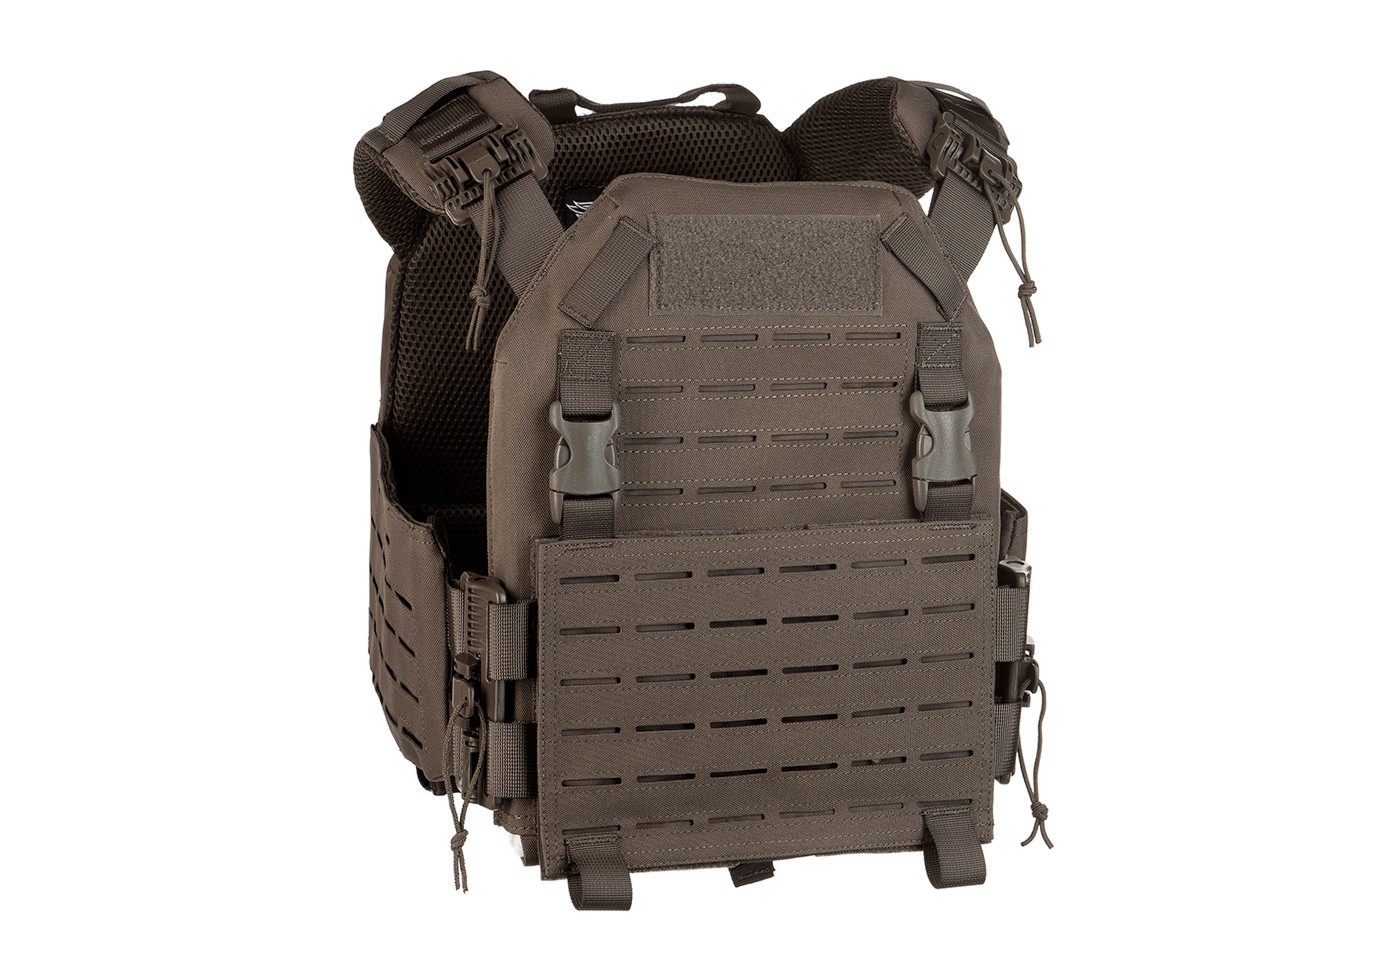 Invader gear - Plate Carrier REAPER QRB - Elite Airsoft